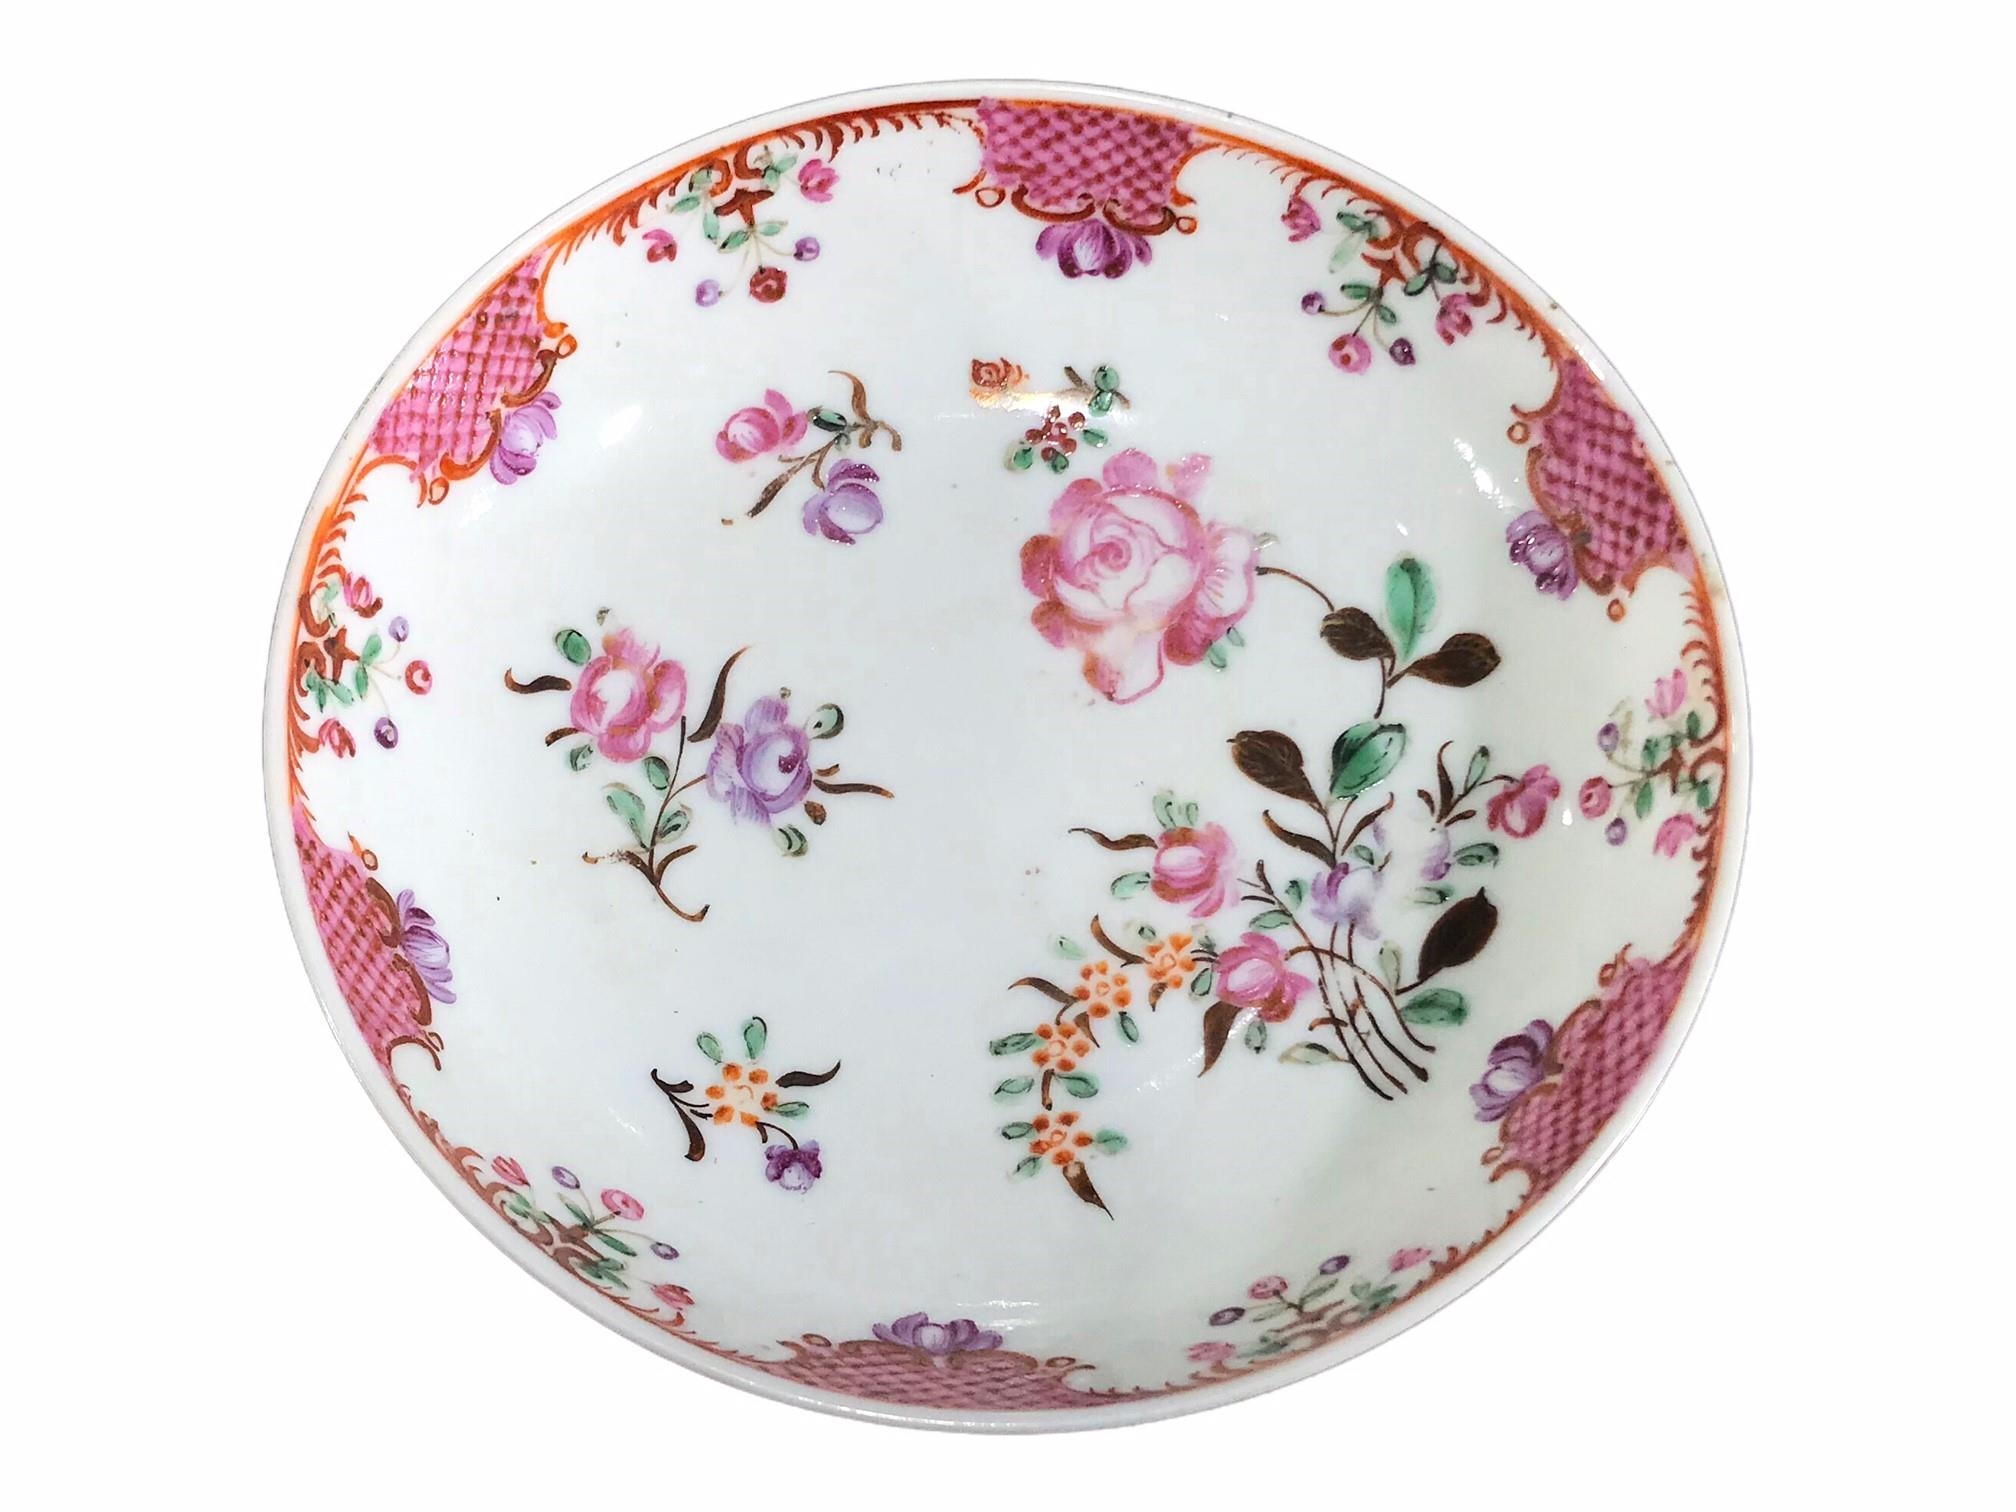 AN 18TH CENTURY CHINESE EXPORT FAMILLE ROSE PORCELAIN TEA BOWL AND SAUCER Decorated with roses and - Image 2 of 3